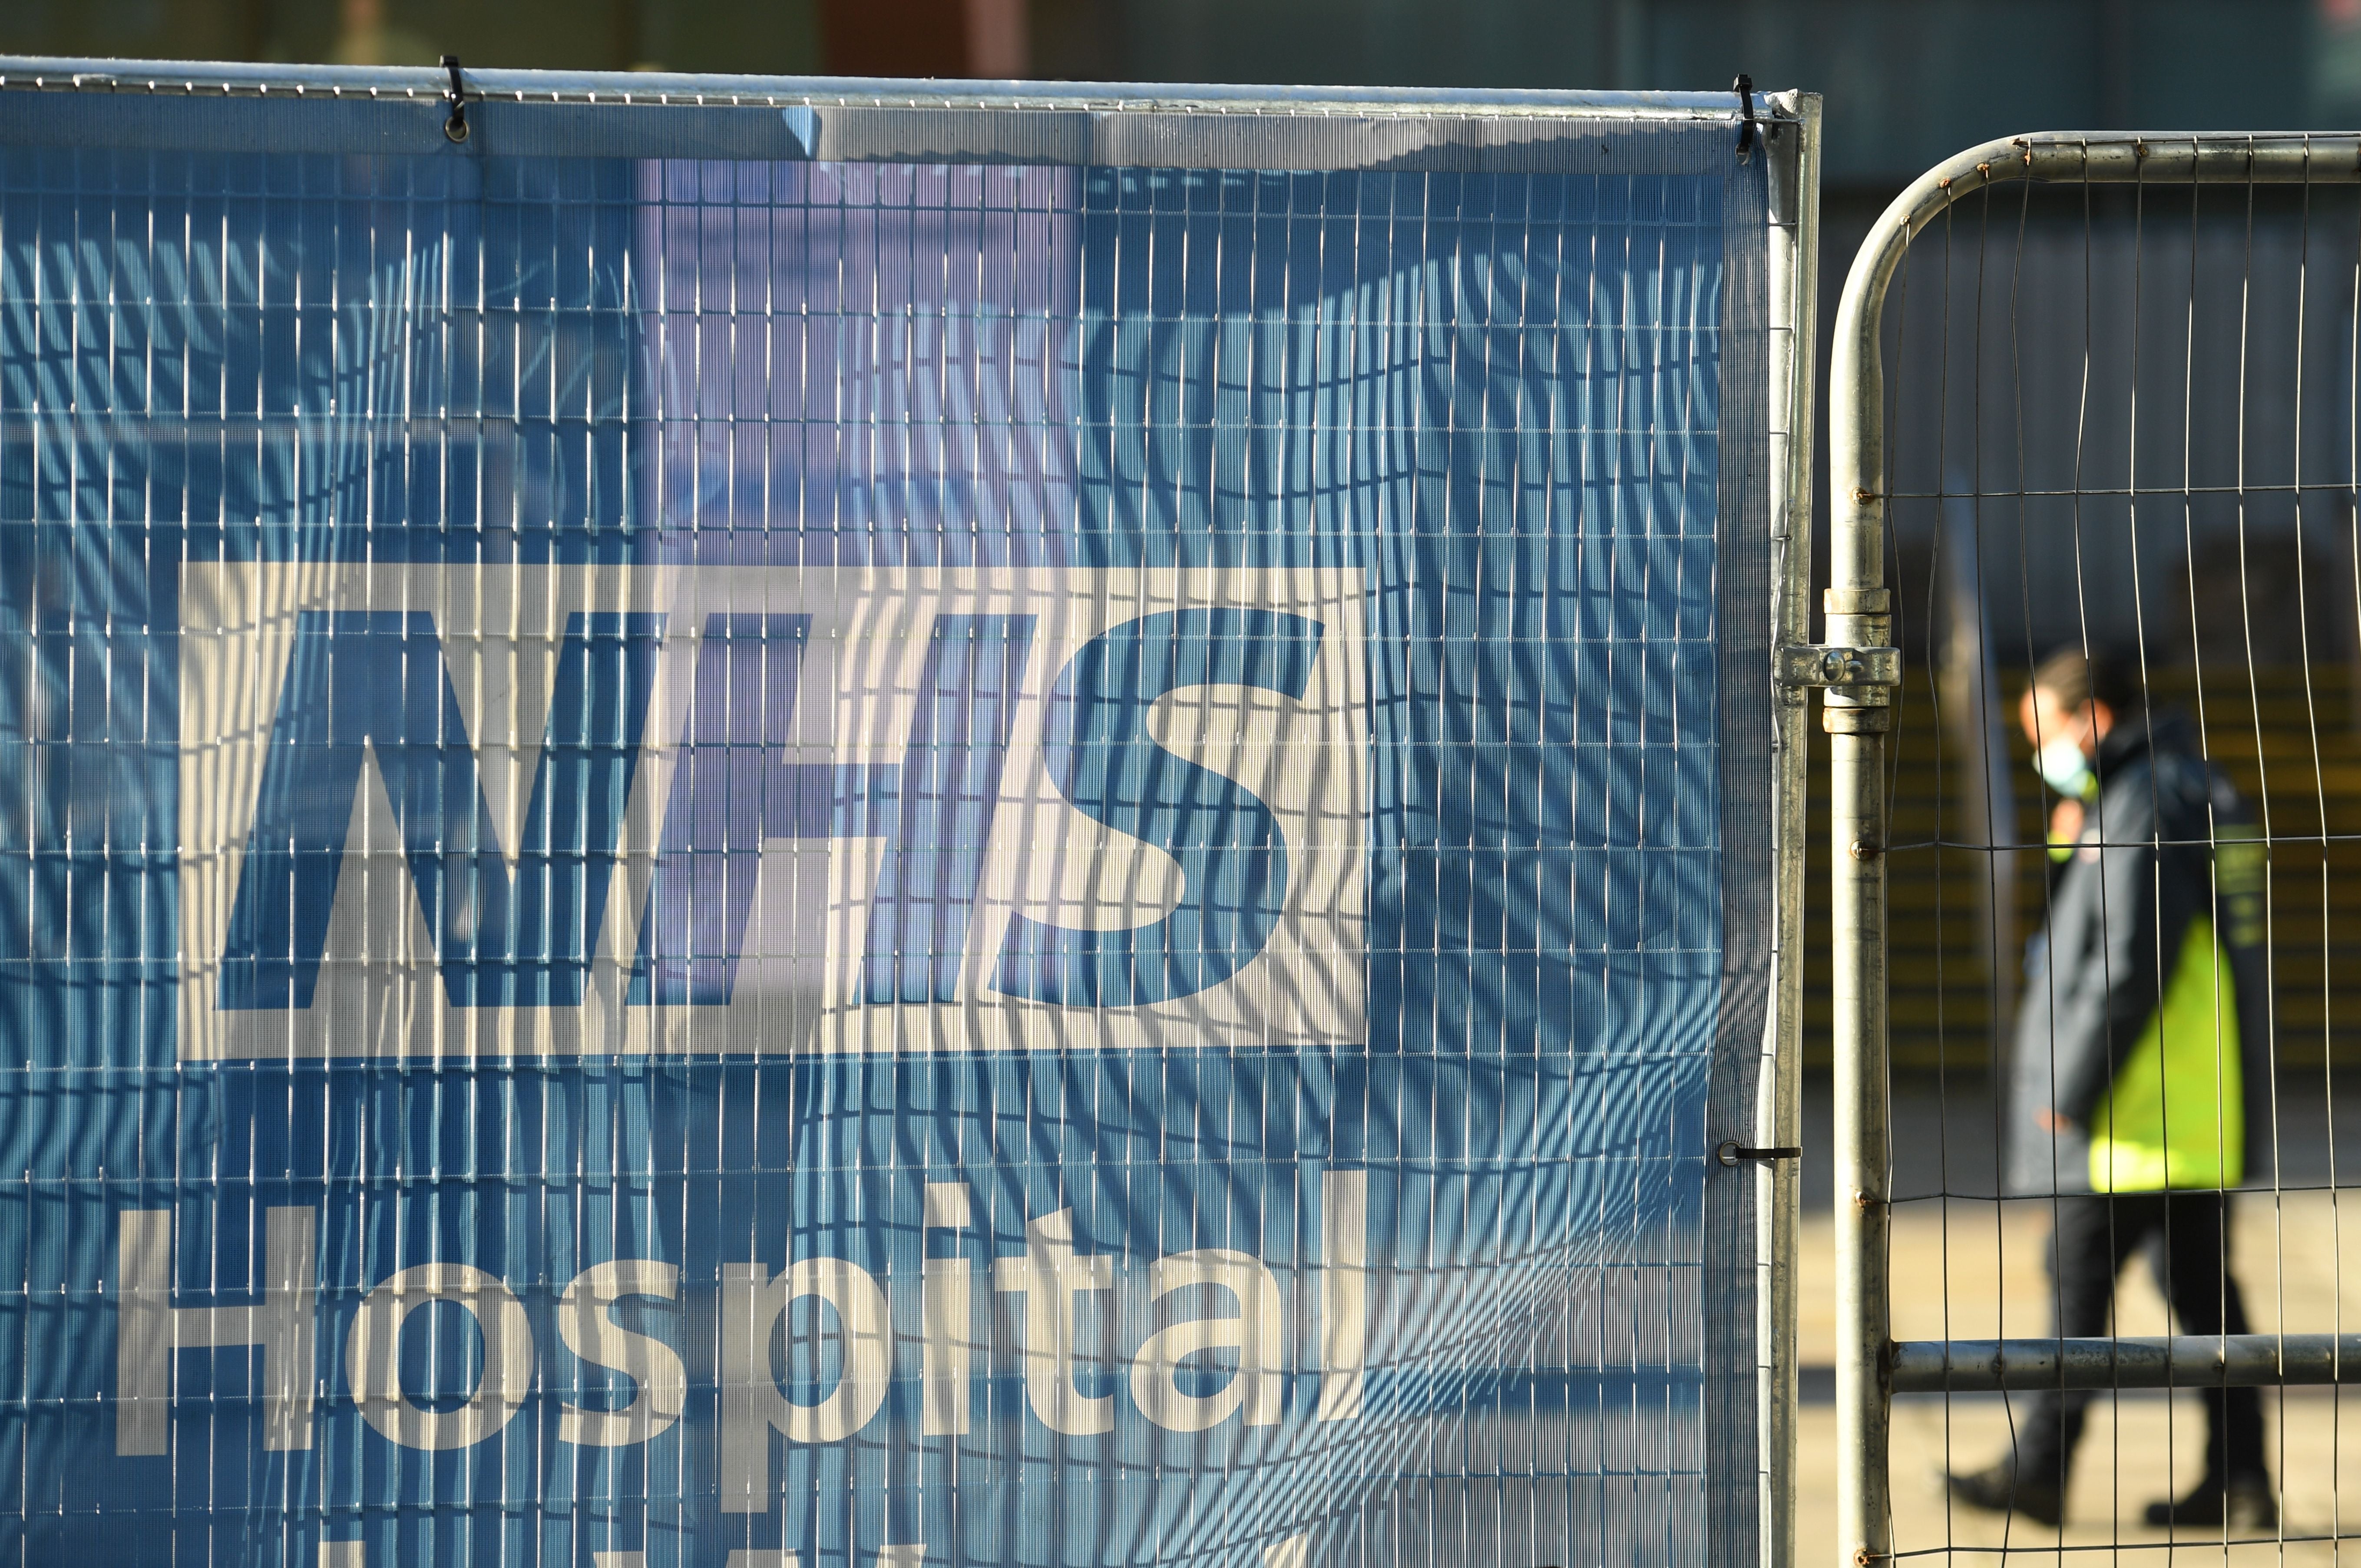 Signage is seen outside the NHS Nightingale Hospital